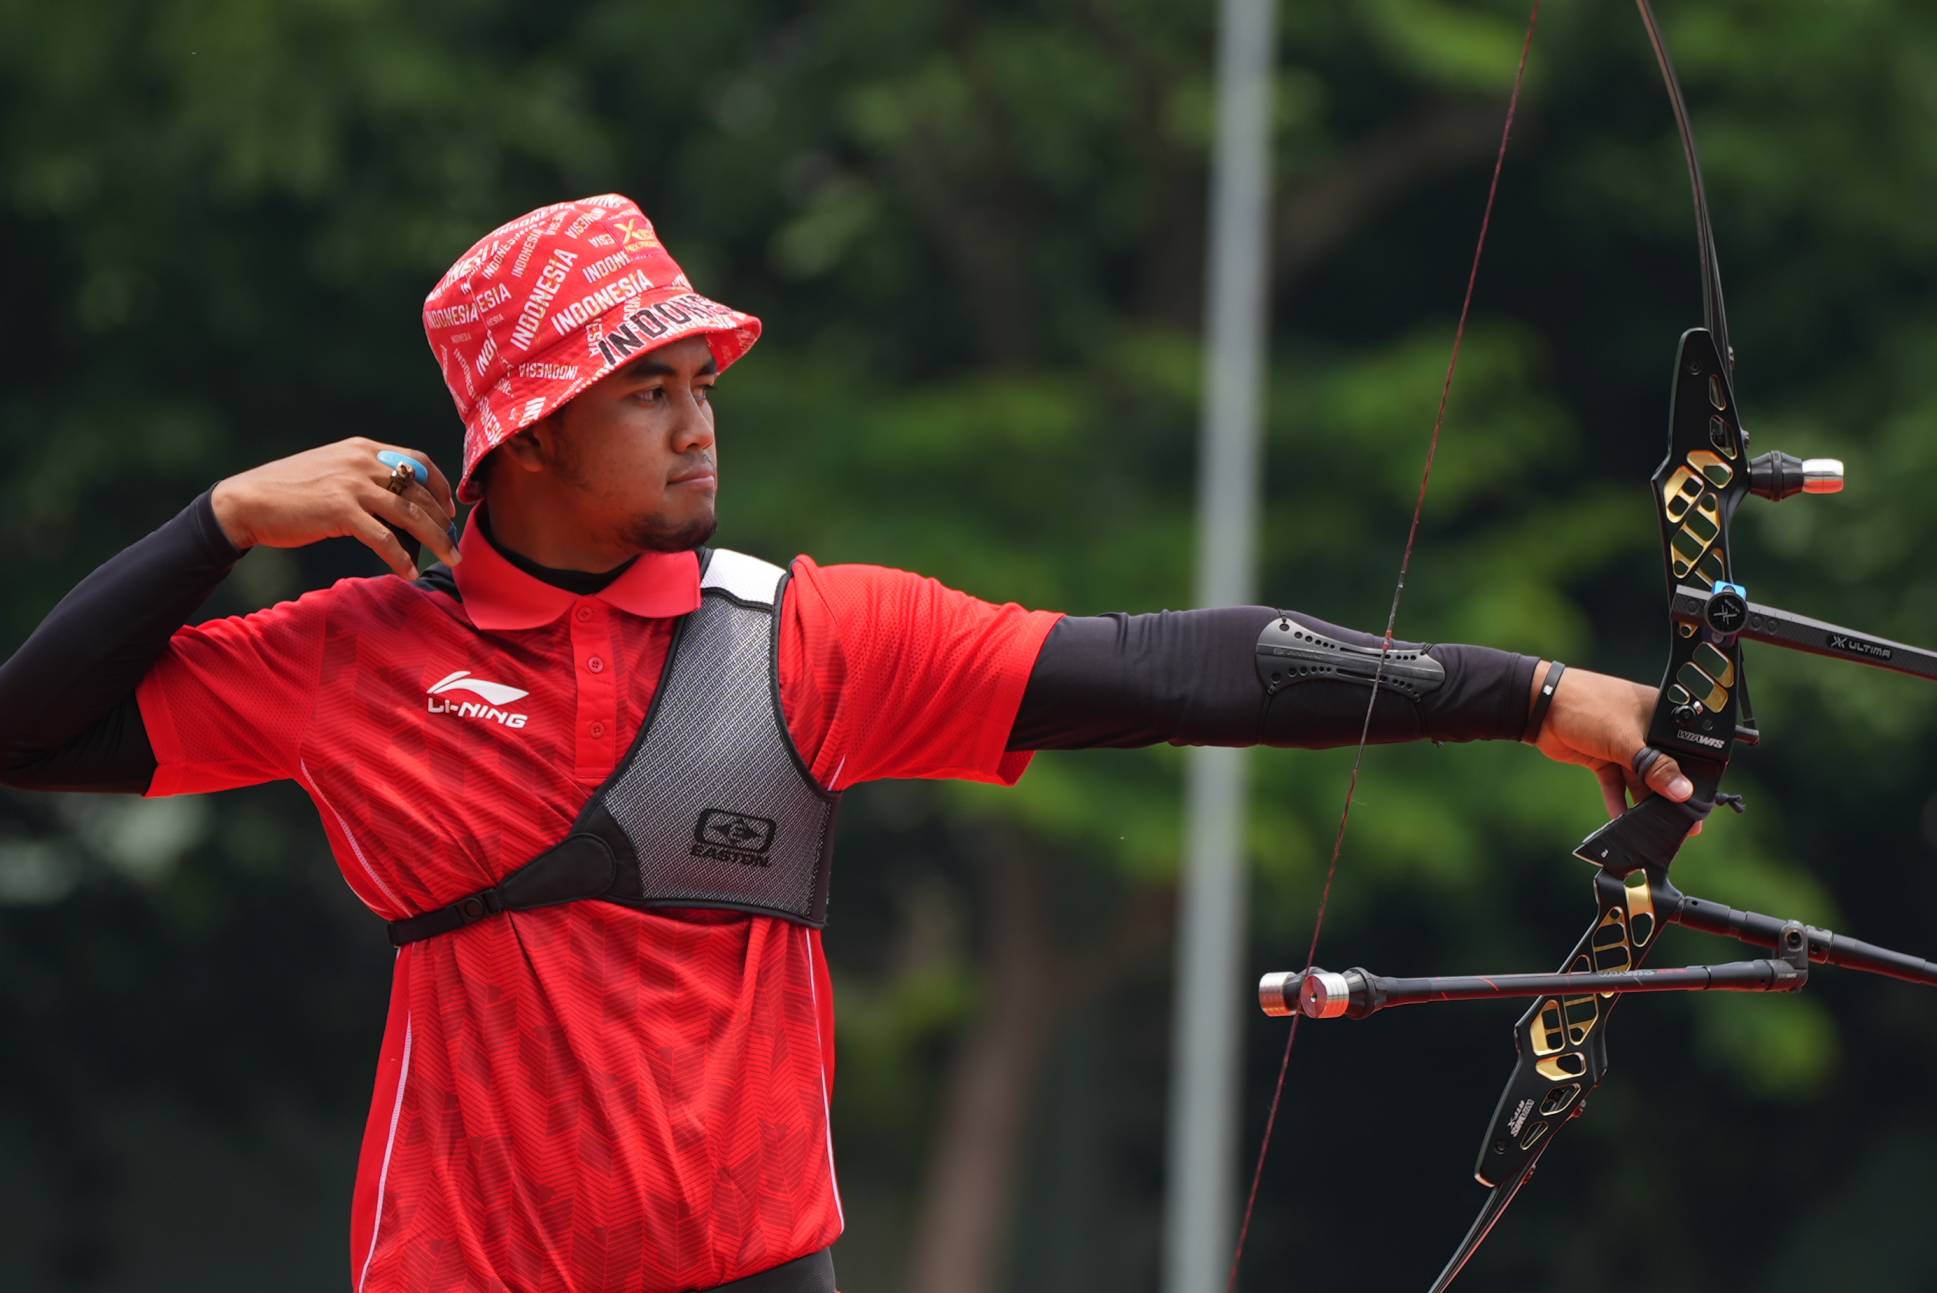 Indonesia Olympic Commitee - Indonesia came from behind to win the gold medal in Men's Recurve